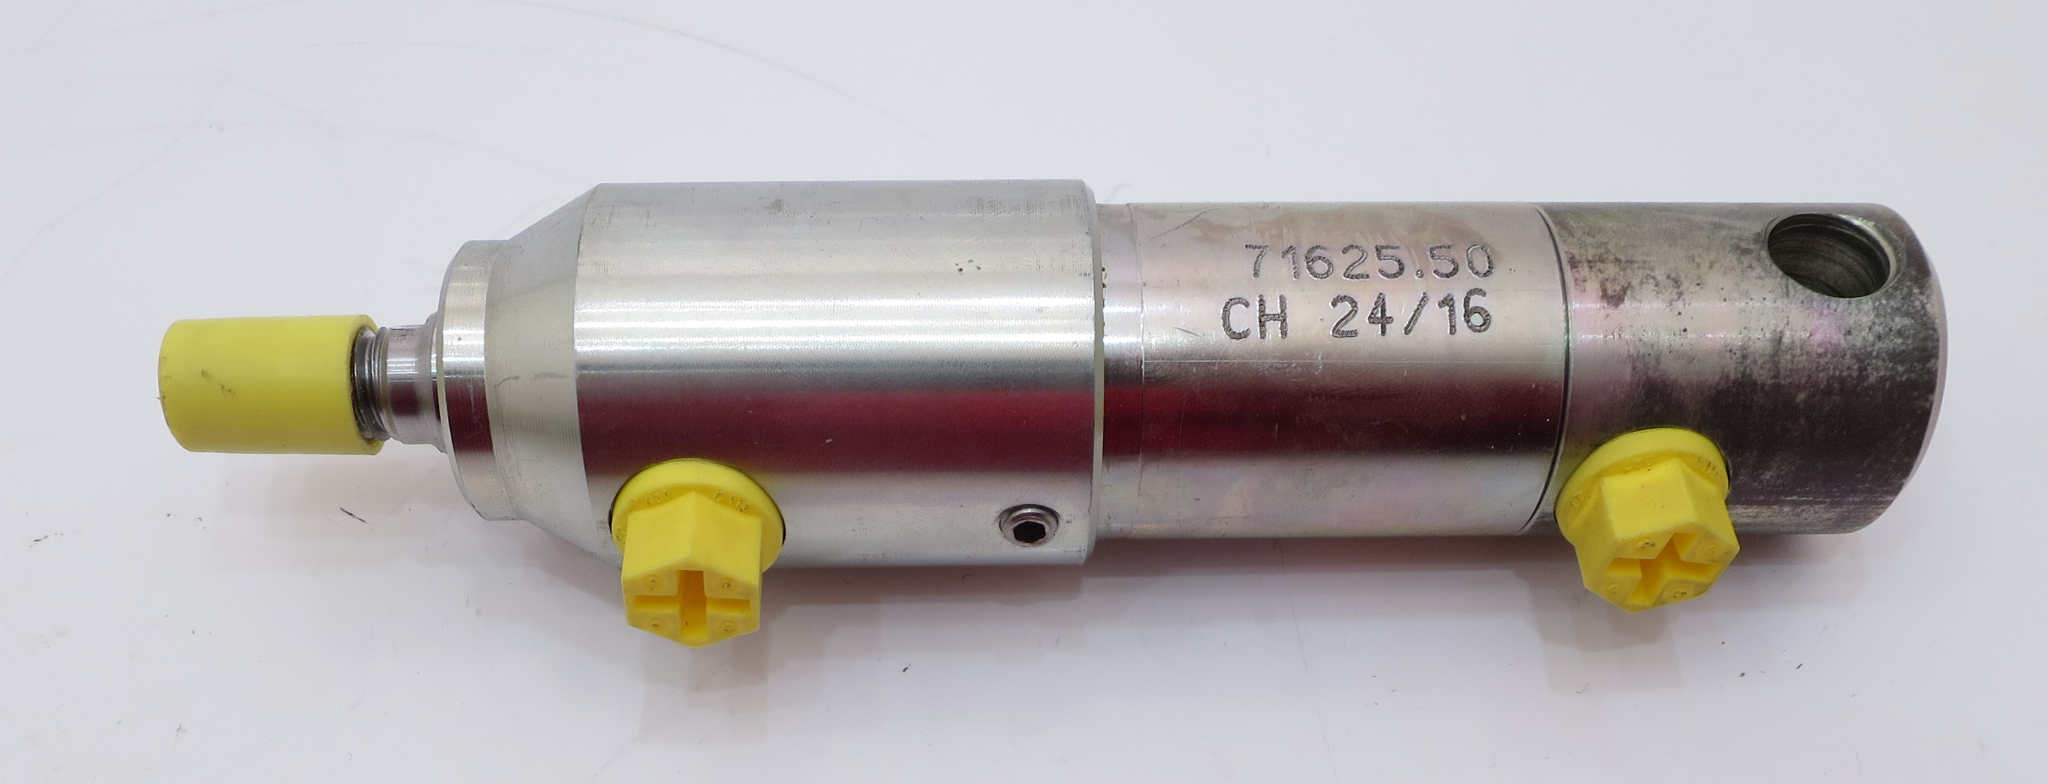 What Is a Double-Acting Hydraulic Cylinder Used For?